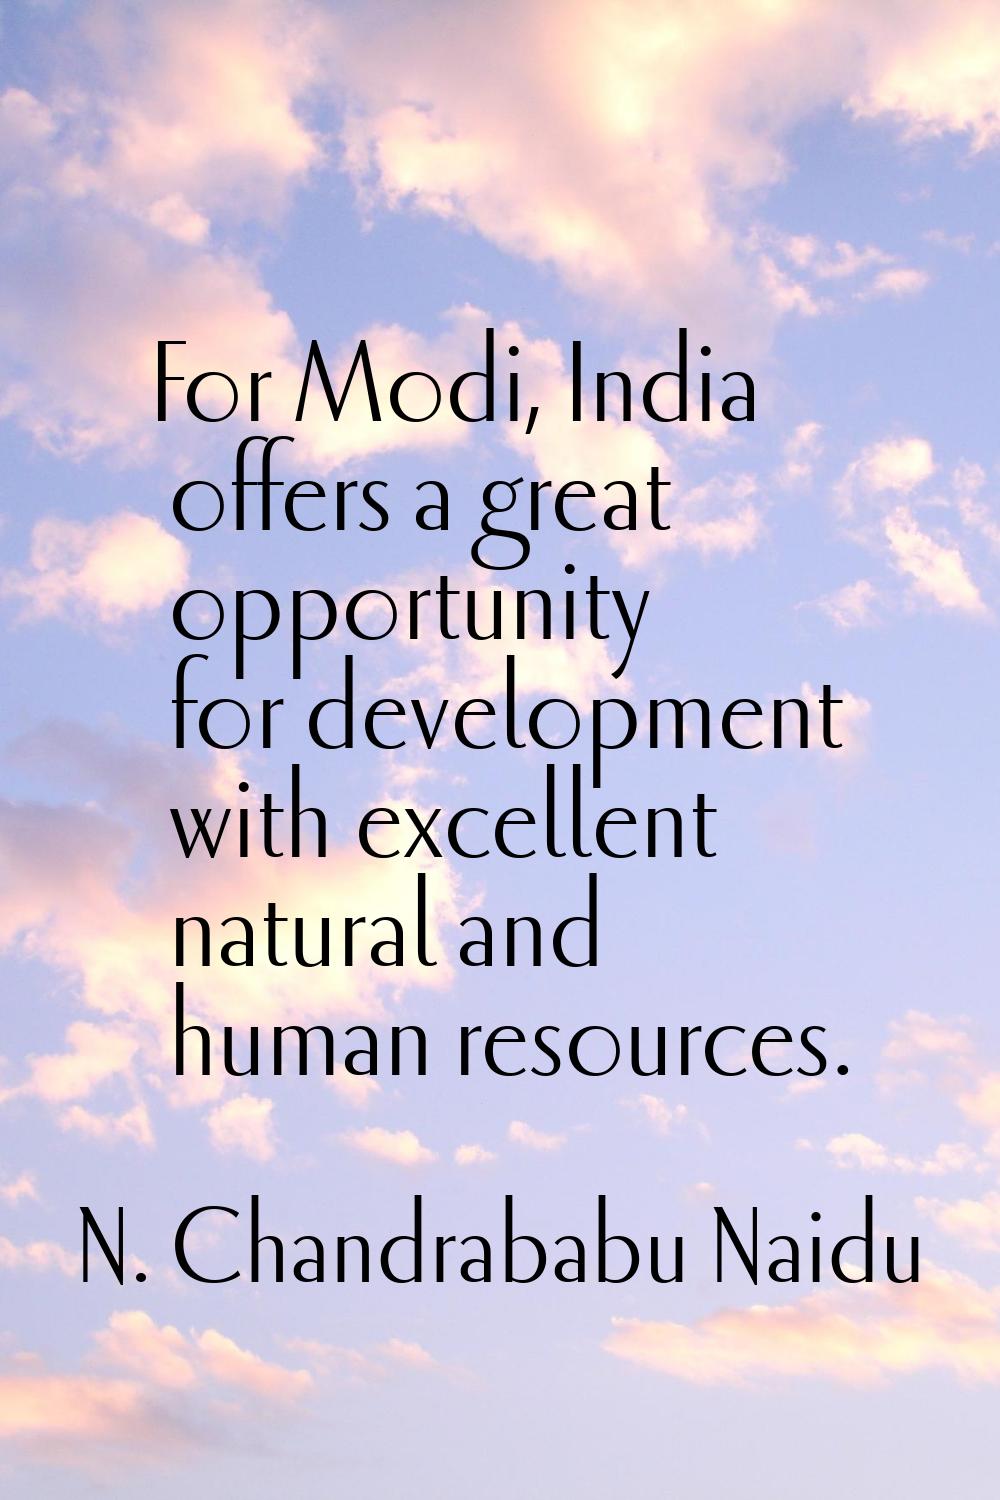 For Modi, India offers a great opportunity for development with excellent natural and human resourc